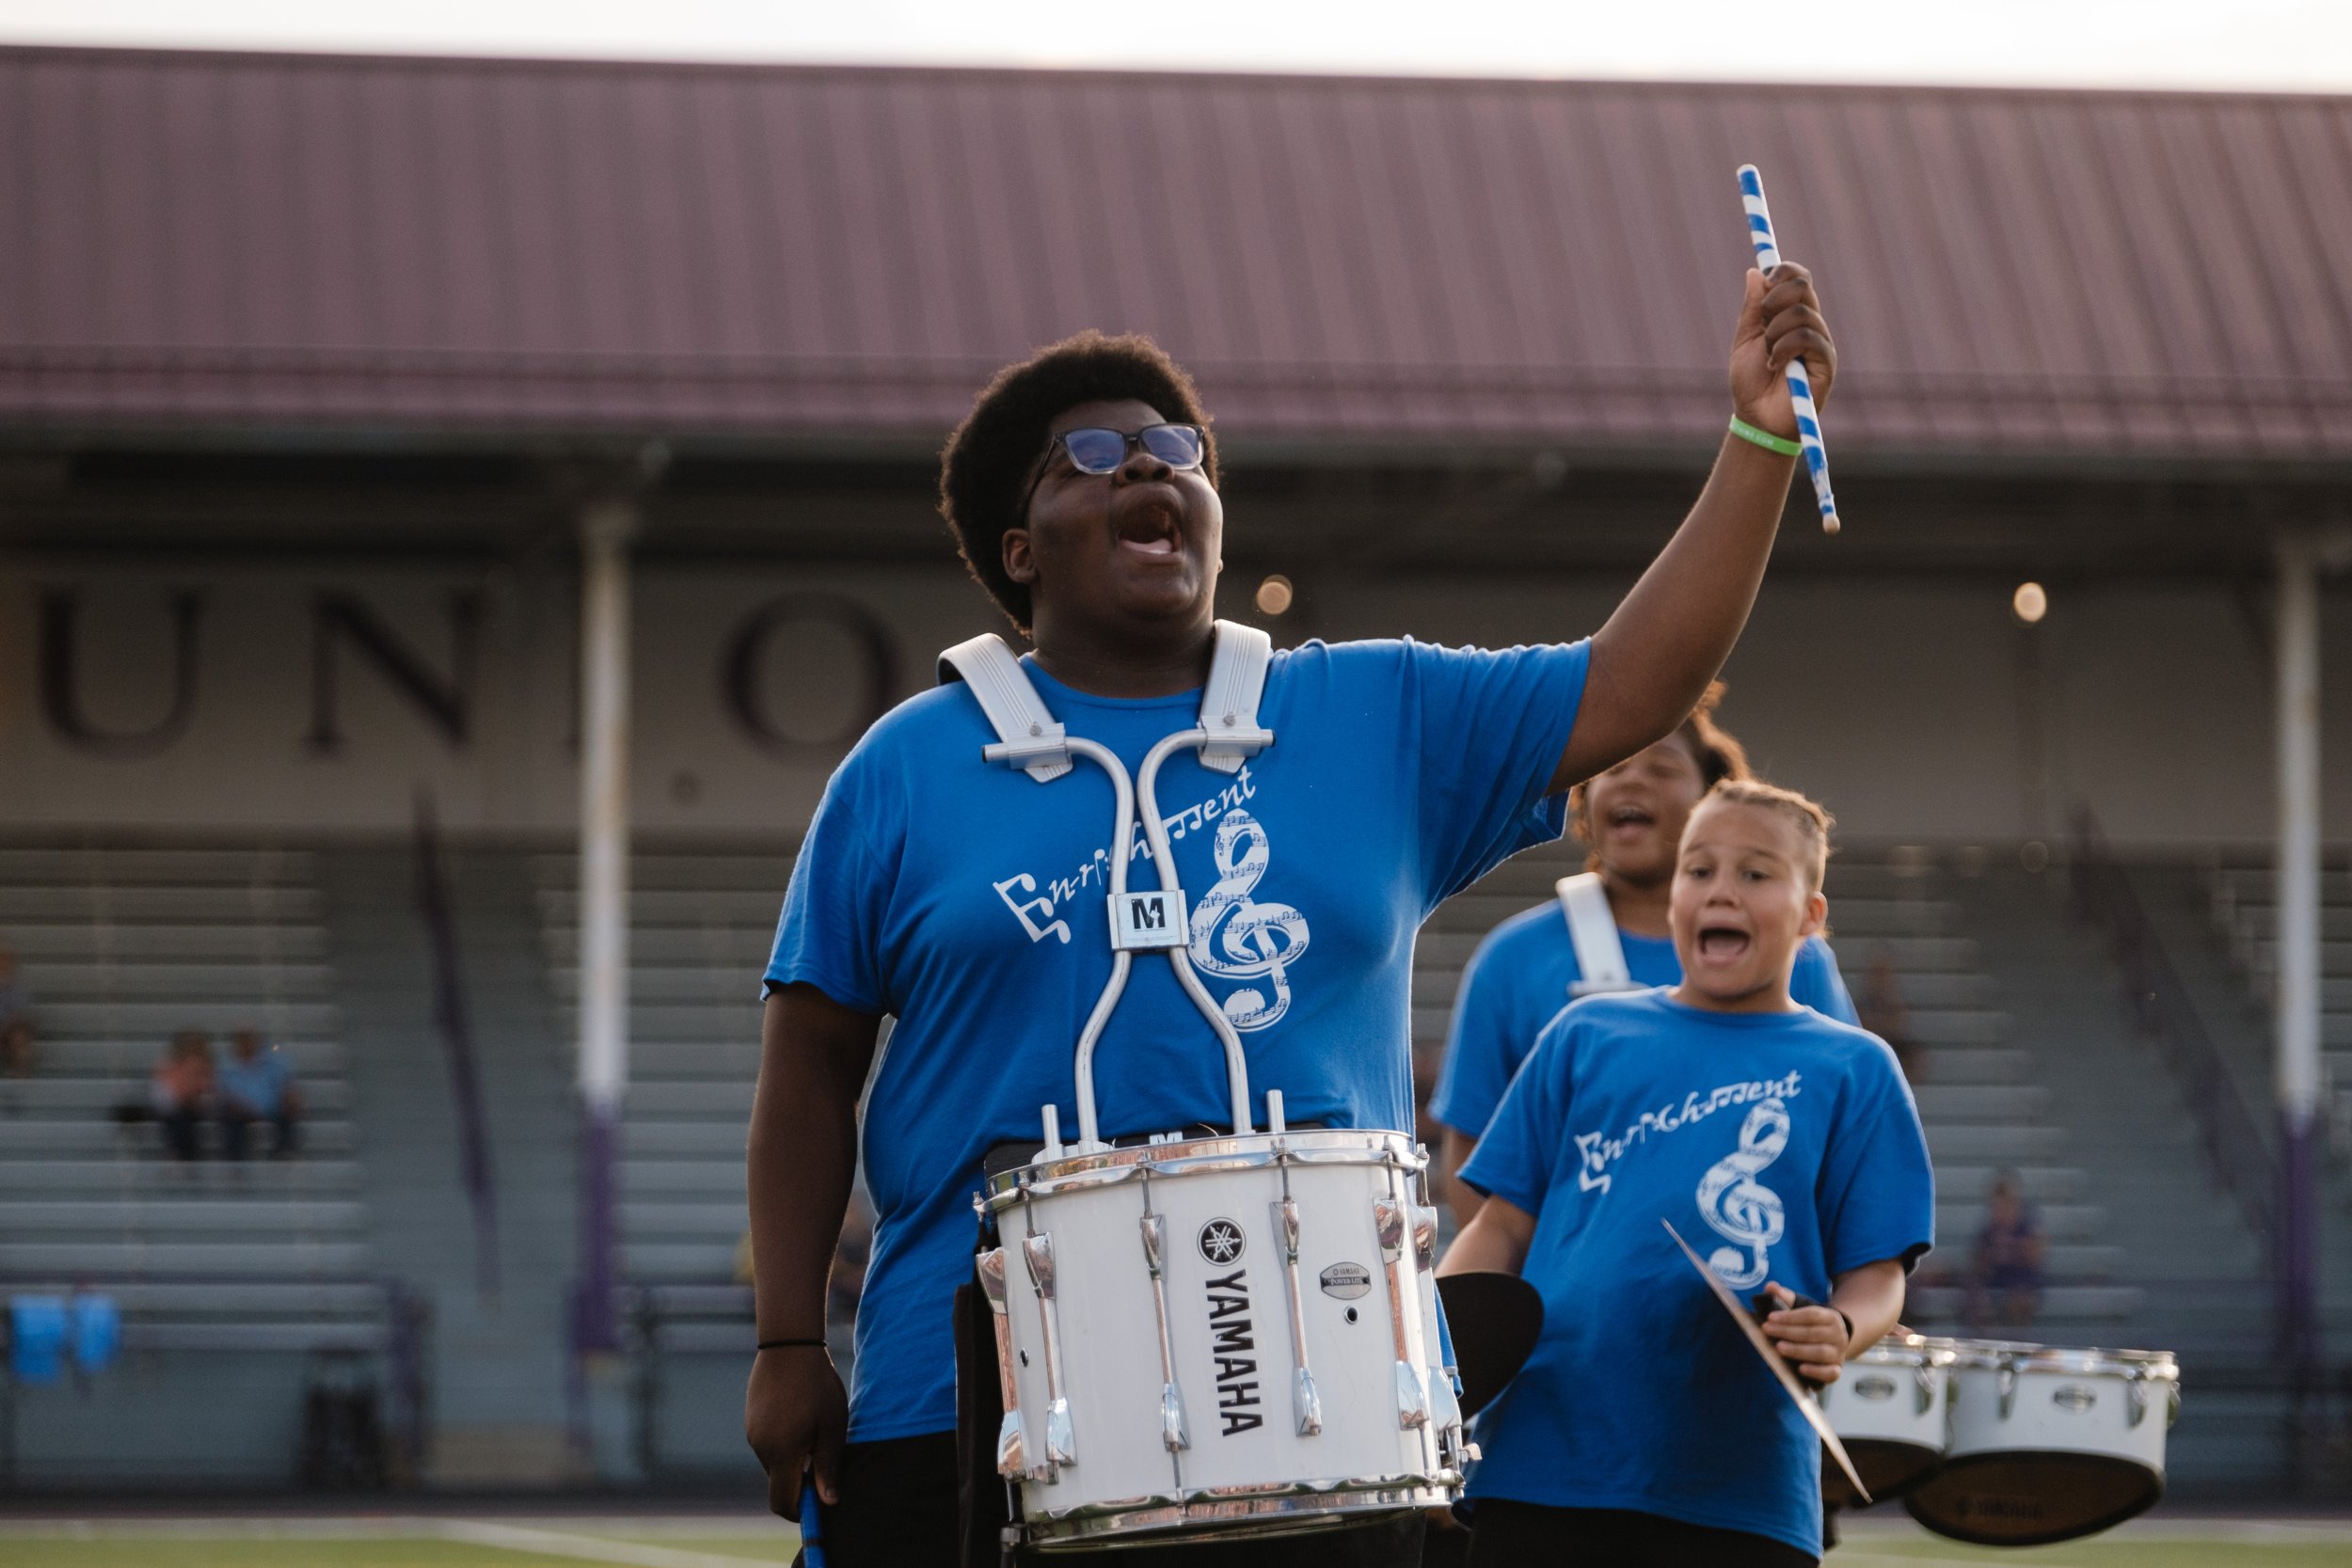 EN-RICH-MENT snare drummer performing at Bluecoats Opening Night.